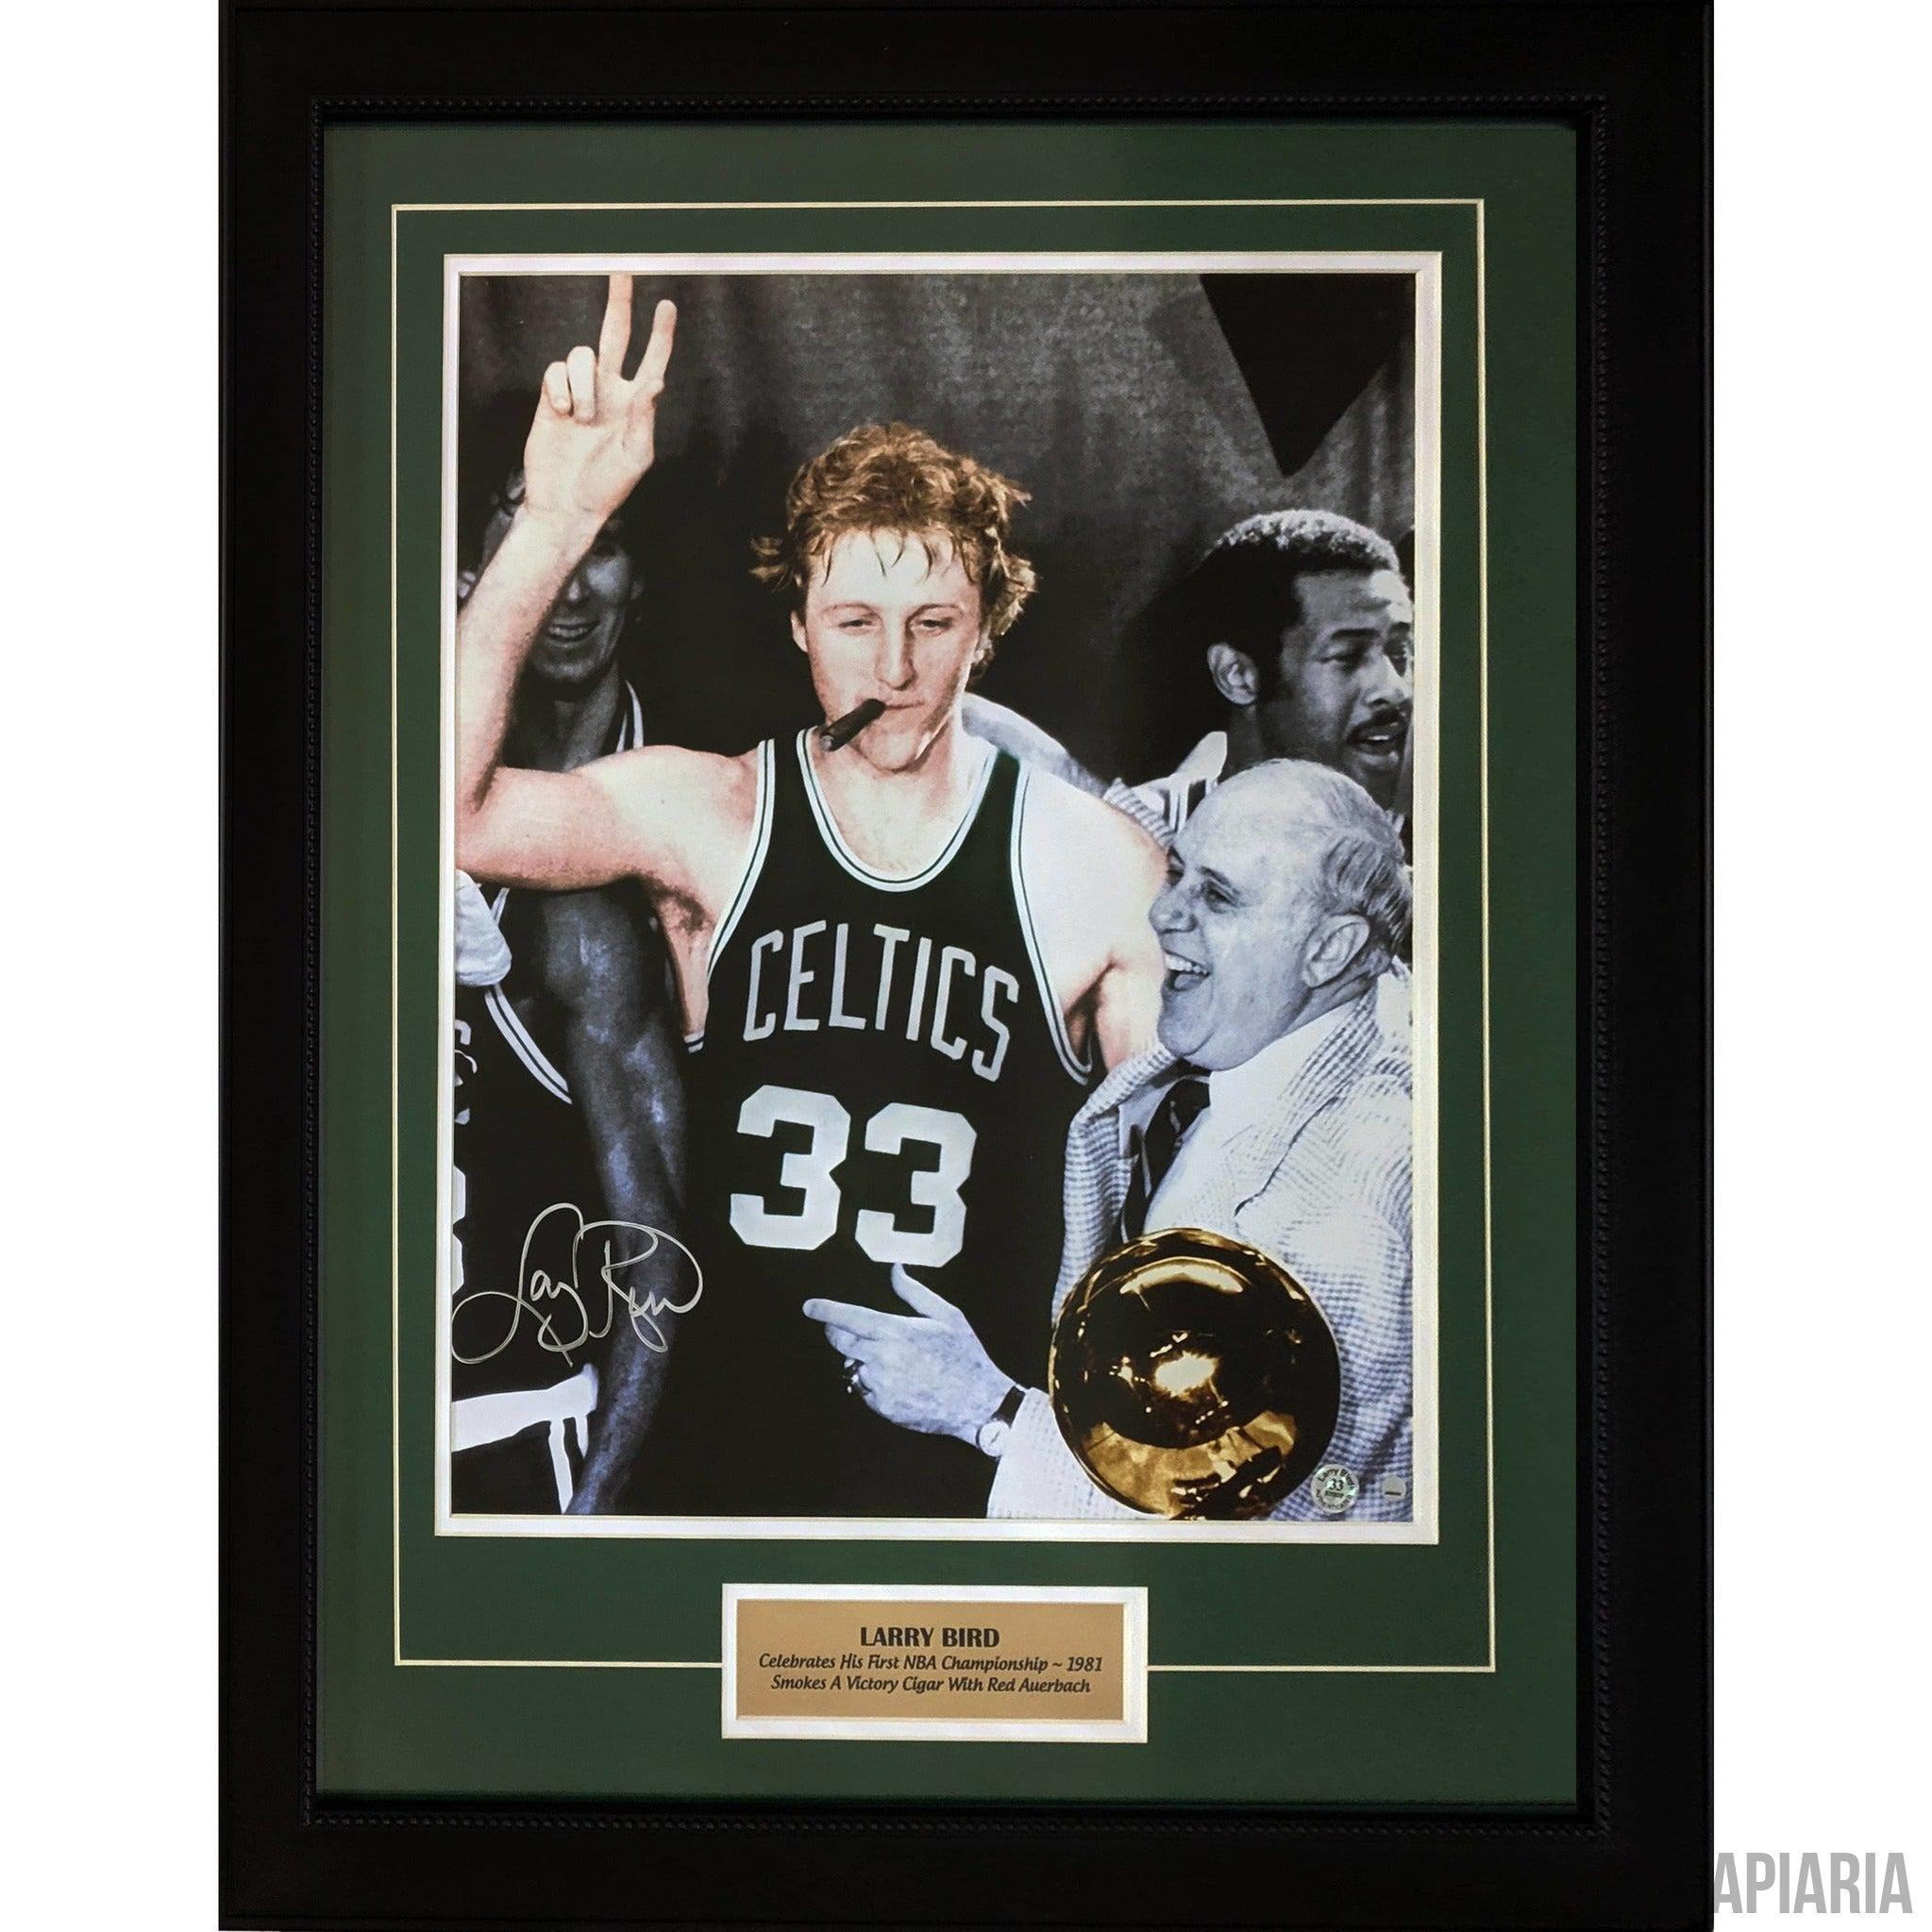 Magic Johnson & Larry Bird Signed One on One Exclusive NBA